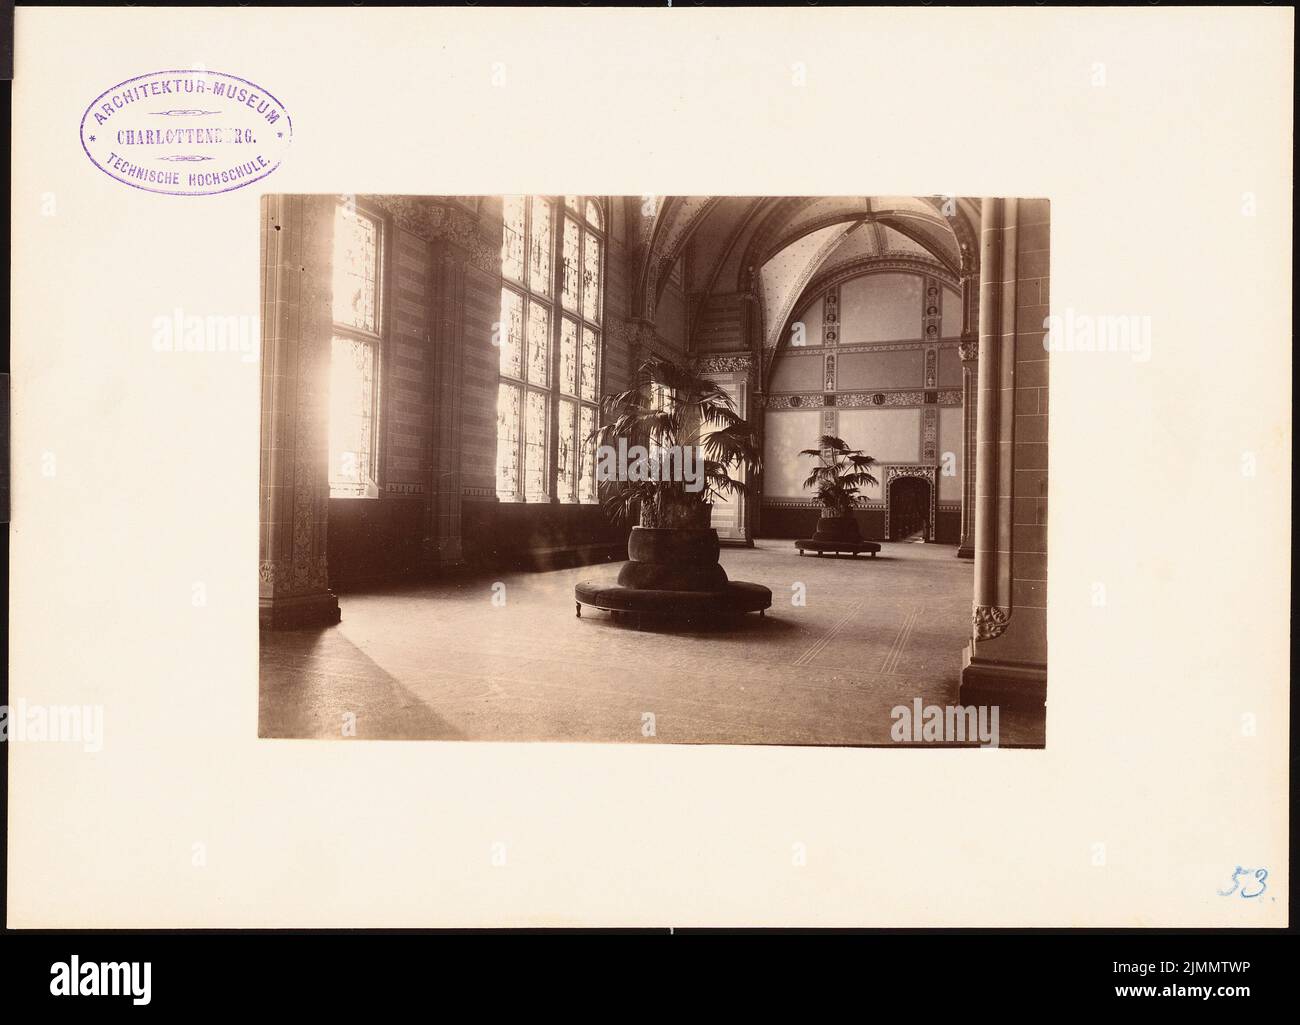 Cuypers P. J. H. (1827-1921), Reichsmuseum, Amsterdam (1885): Interior view of a large room. Photo on paper, on cardboard, 19.8 x 27.6 cm (including scan edges) Stock Photo